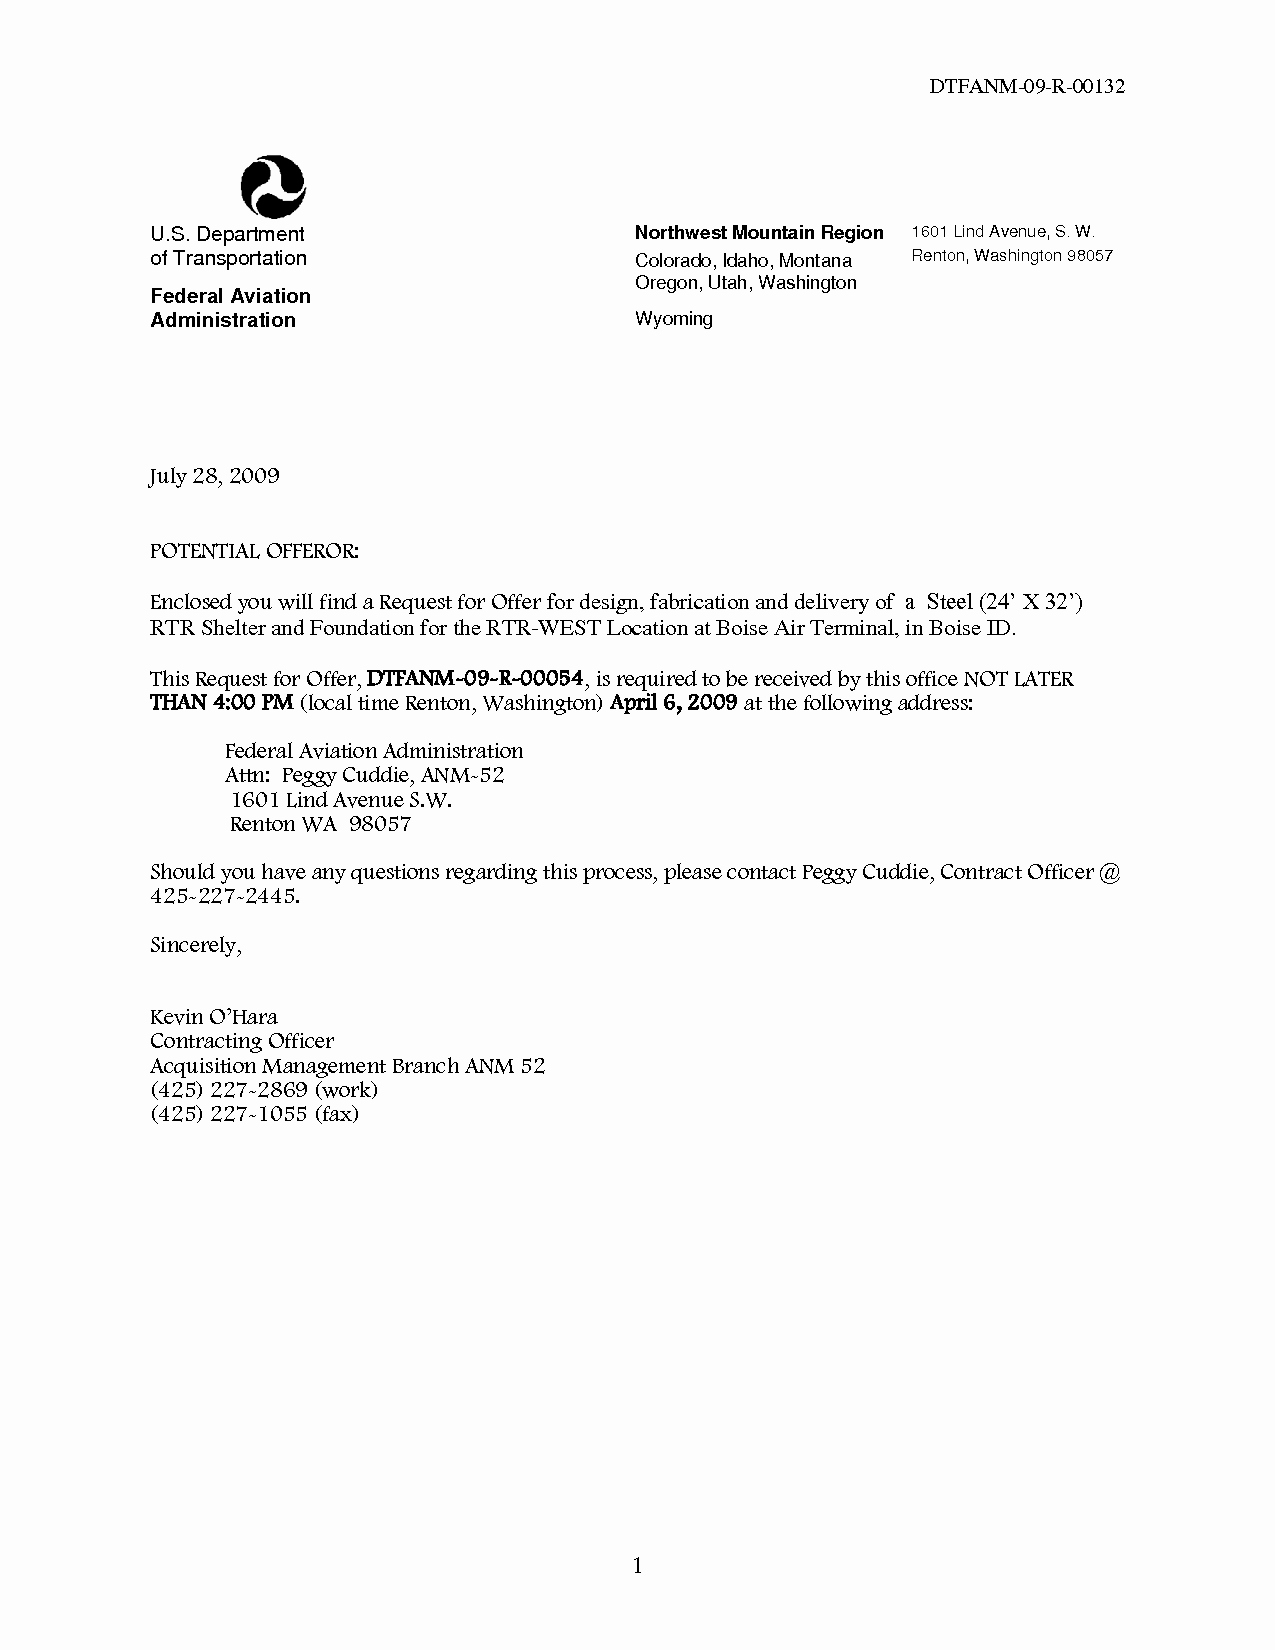 Templates for Letter Of Recommendation Lovely Bank Reference Letter Template Mughals